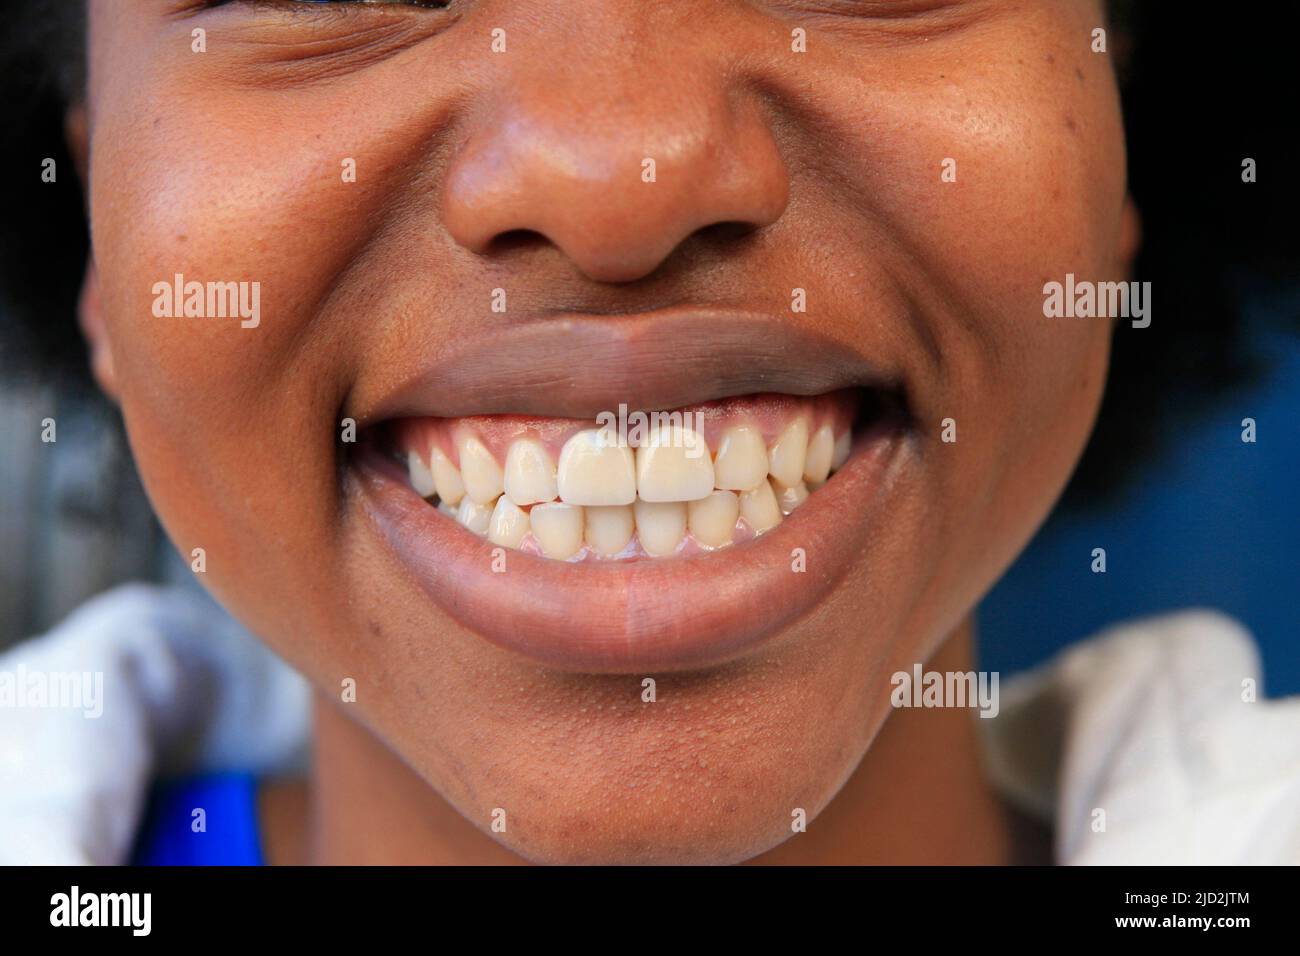 Close up of smiling African girl's face and teeth, Braamfontein, Johannesburg, Gauteng, South Africa. Stock Photo